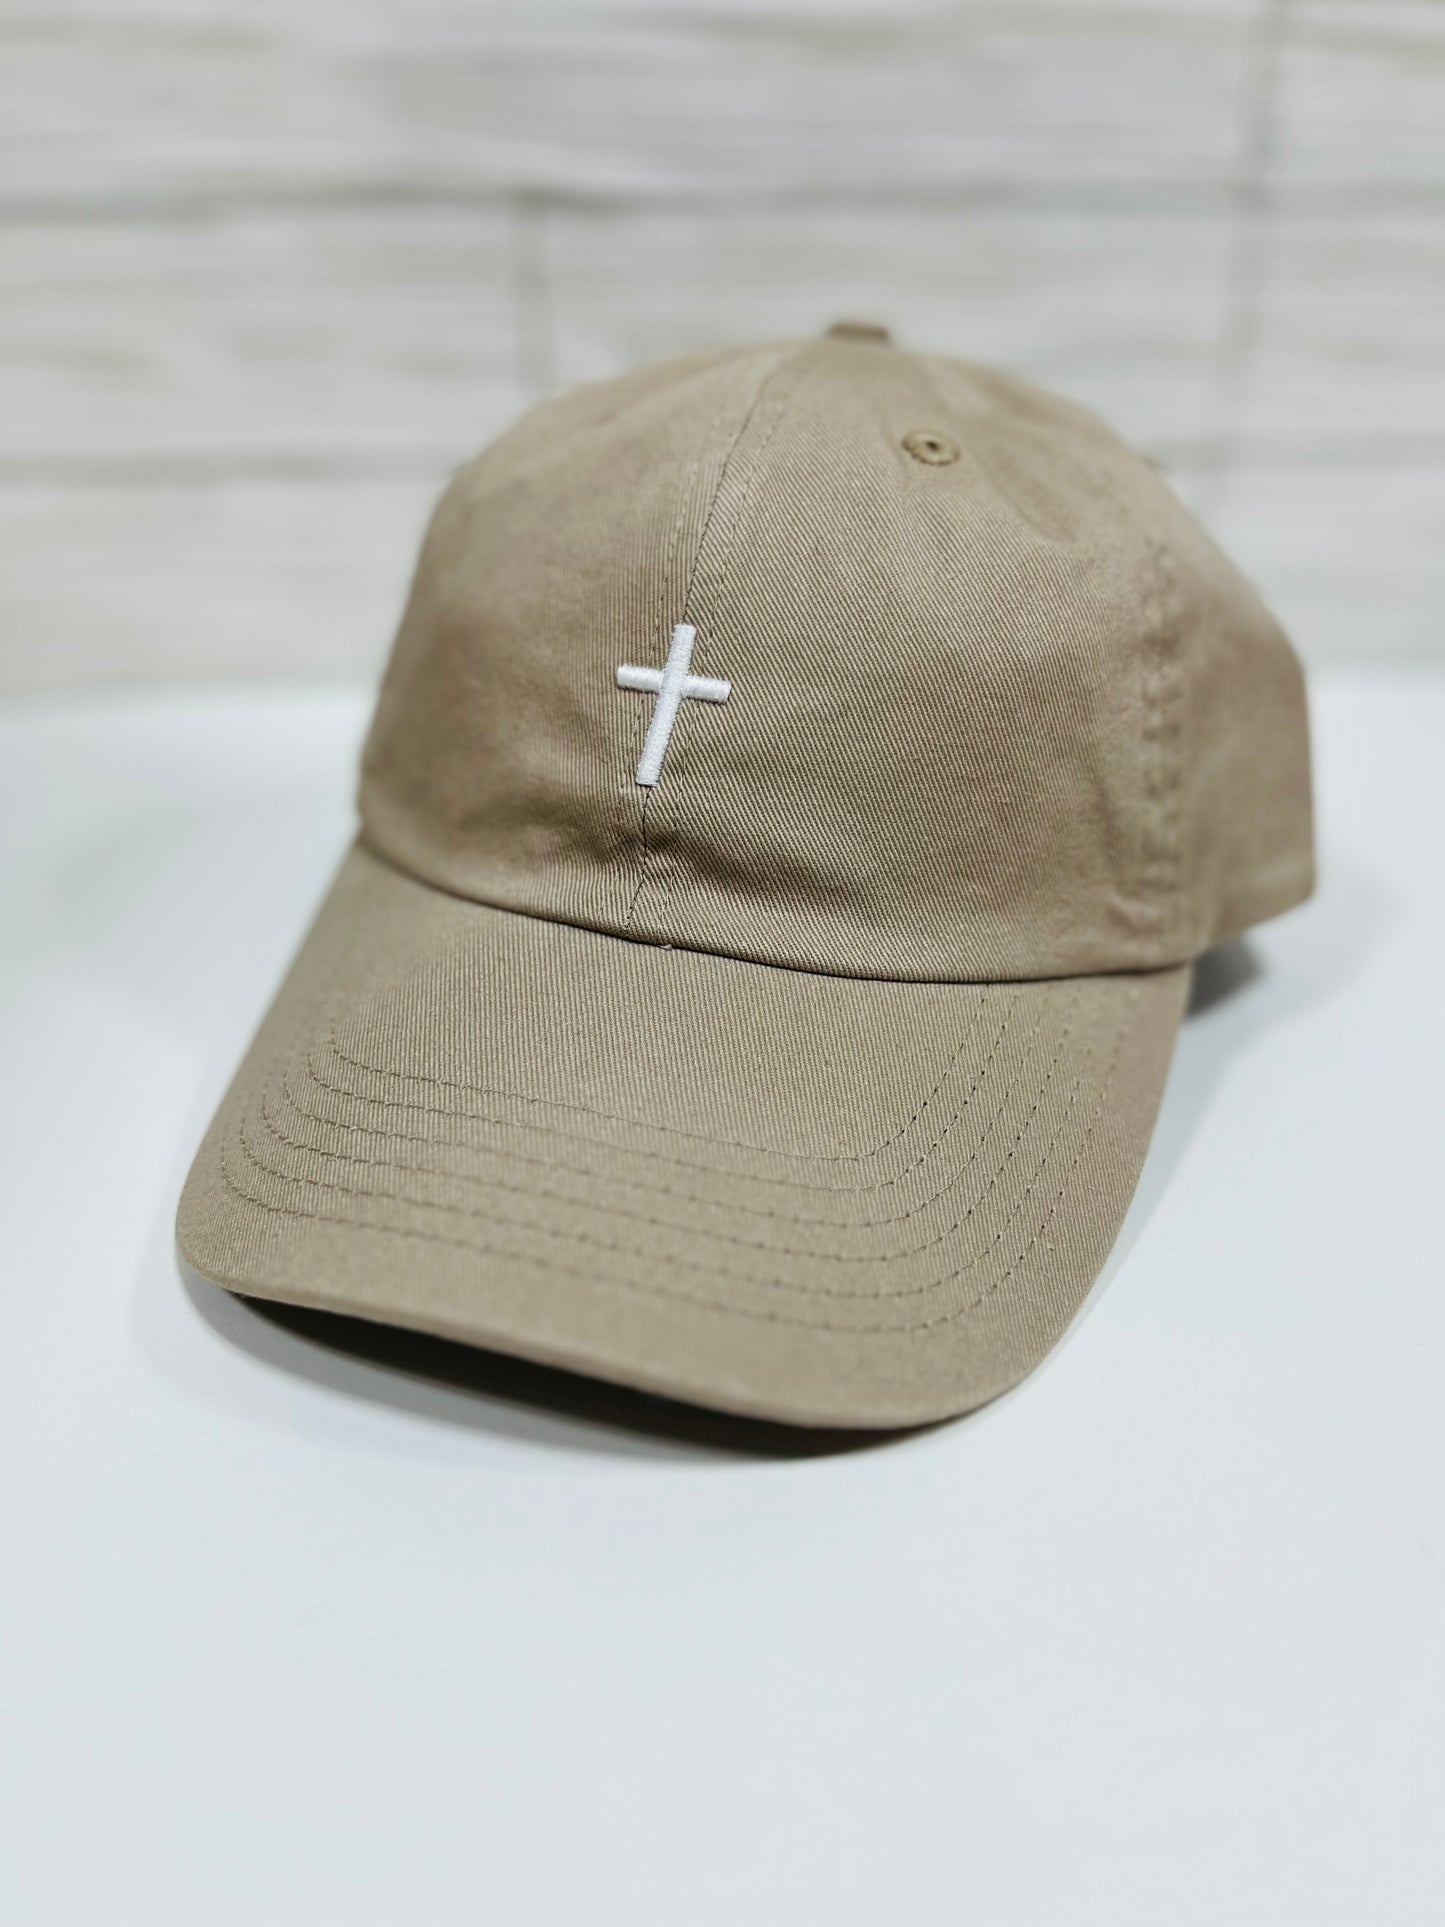 Unstructured "Cross Hat" embroidered with 3D Puff Tan color